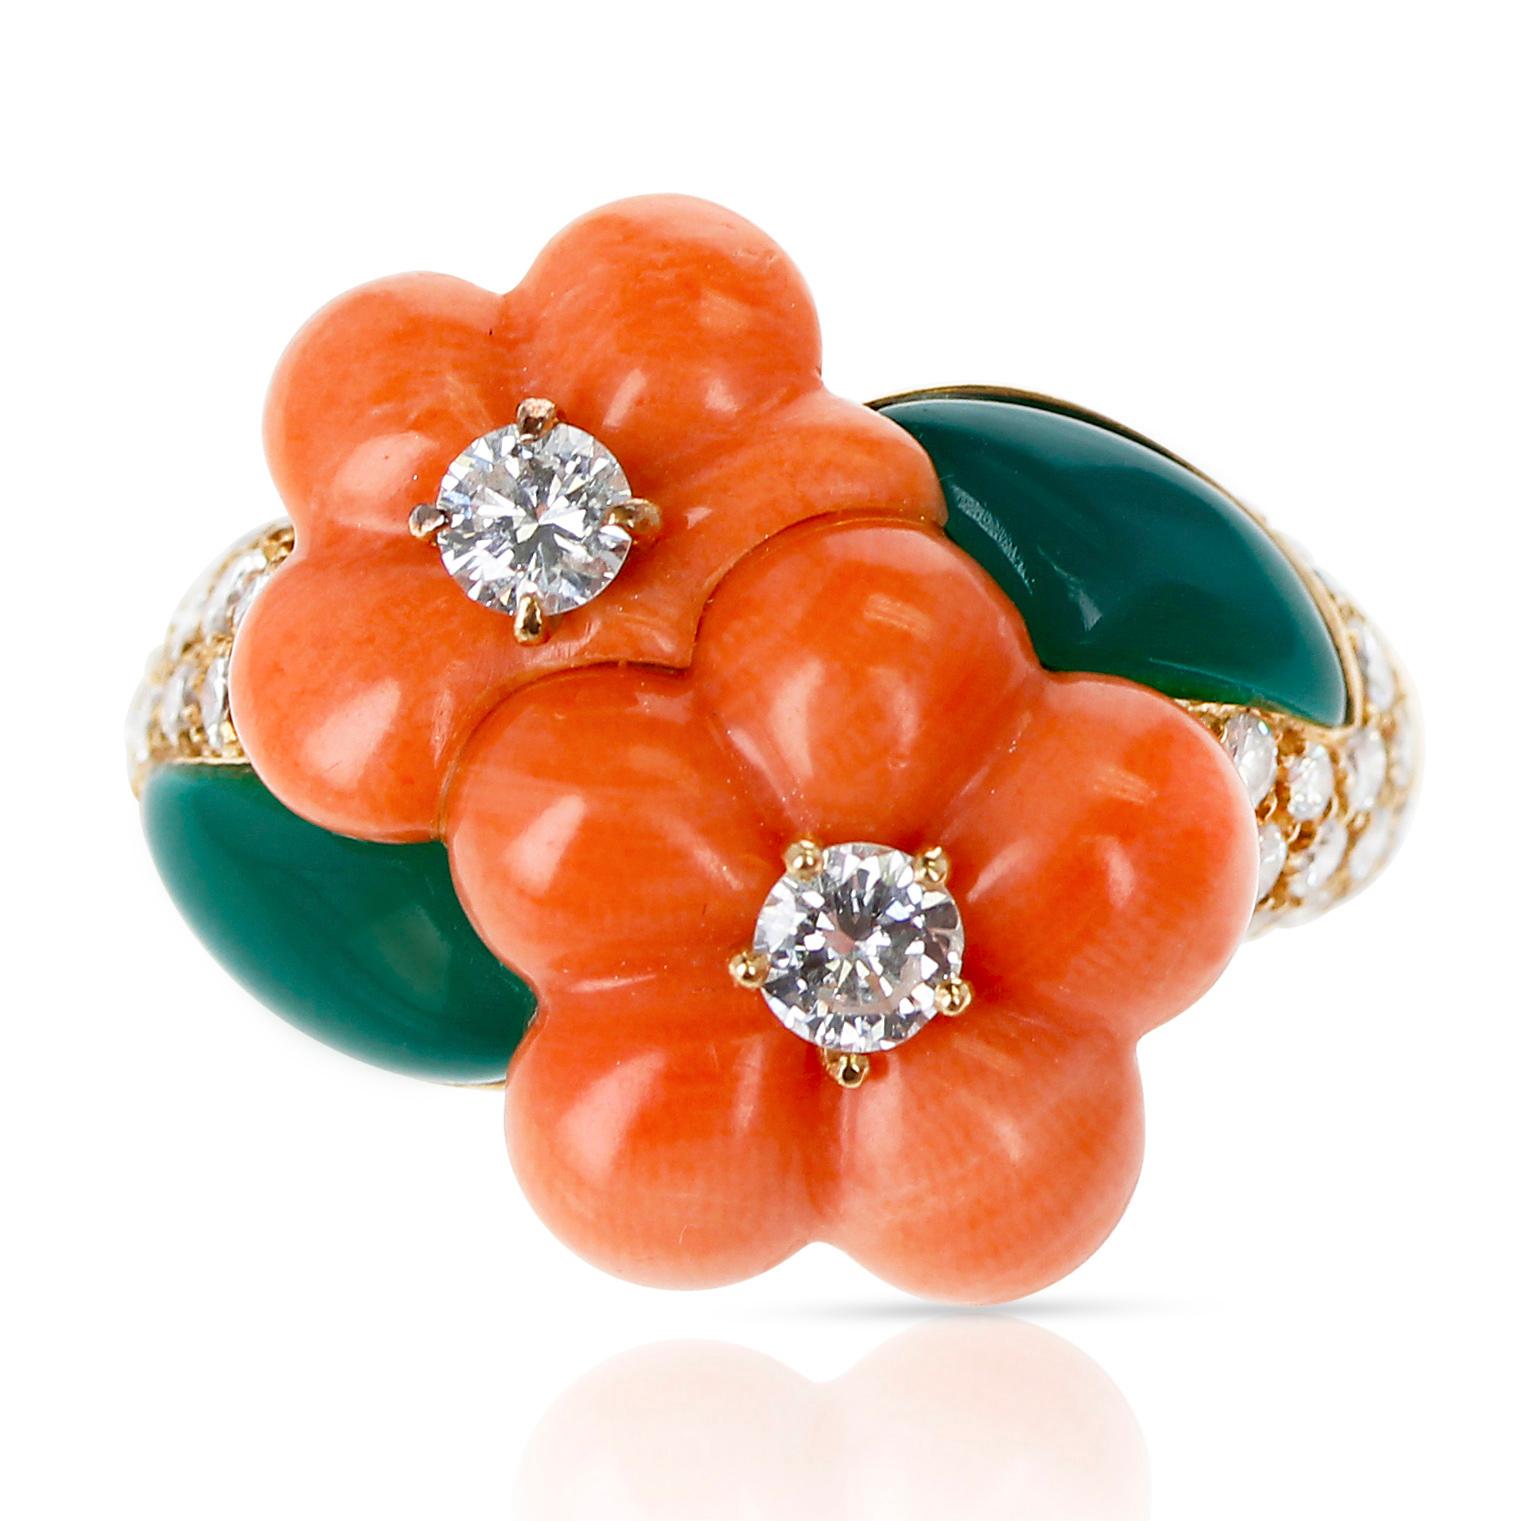 A Van Cleef & Arpels Double Flower Coral, Chrysoprase, and Diamond Ring. The appx. total diamond weight is 0.96 carats, and the color is appx. F and the clarity is appx. VVS1. Total Weight: 12 grams. Ring Size 6.50. 
